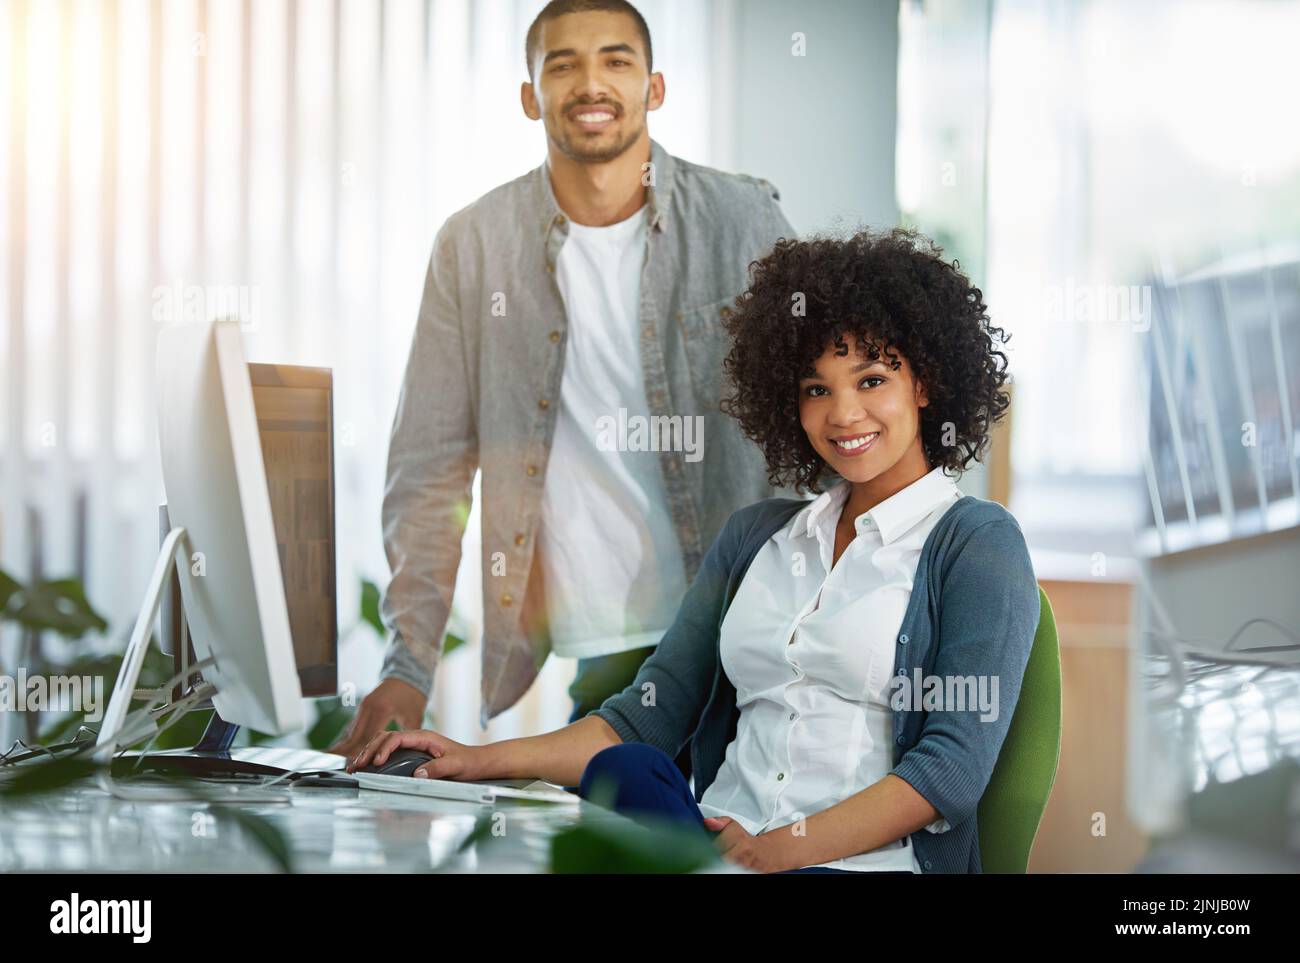 Happy manager or leader helping an employee on a computer to plan ideas or business growth strategy. African female intern or trainee working for a Stock Photo